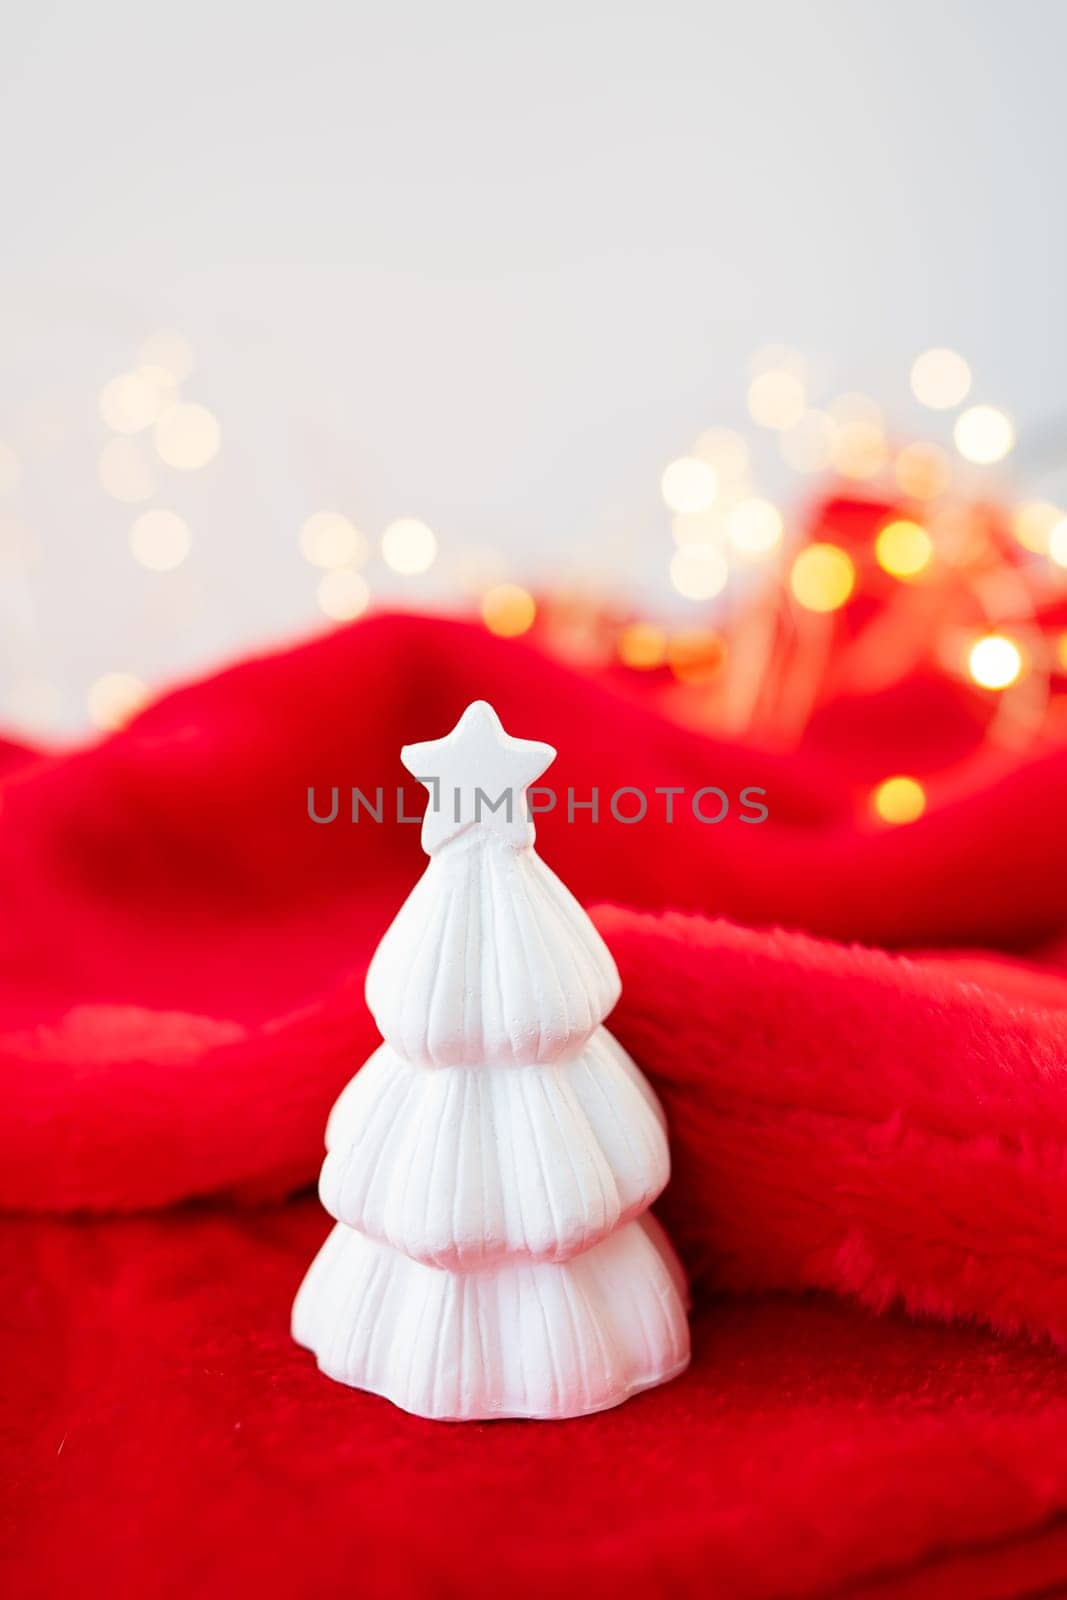 Christmas home interior with a white ceramic Christmas tree on a red blanket. Christmas and New Year concept. Vertical photo